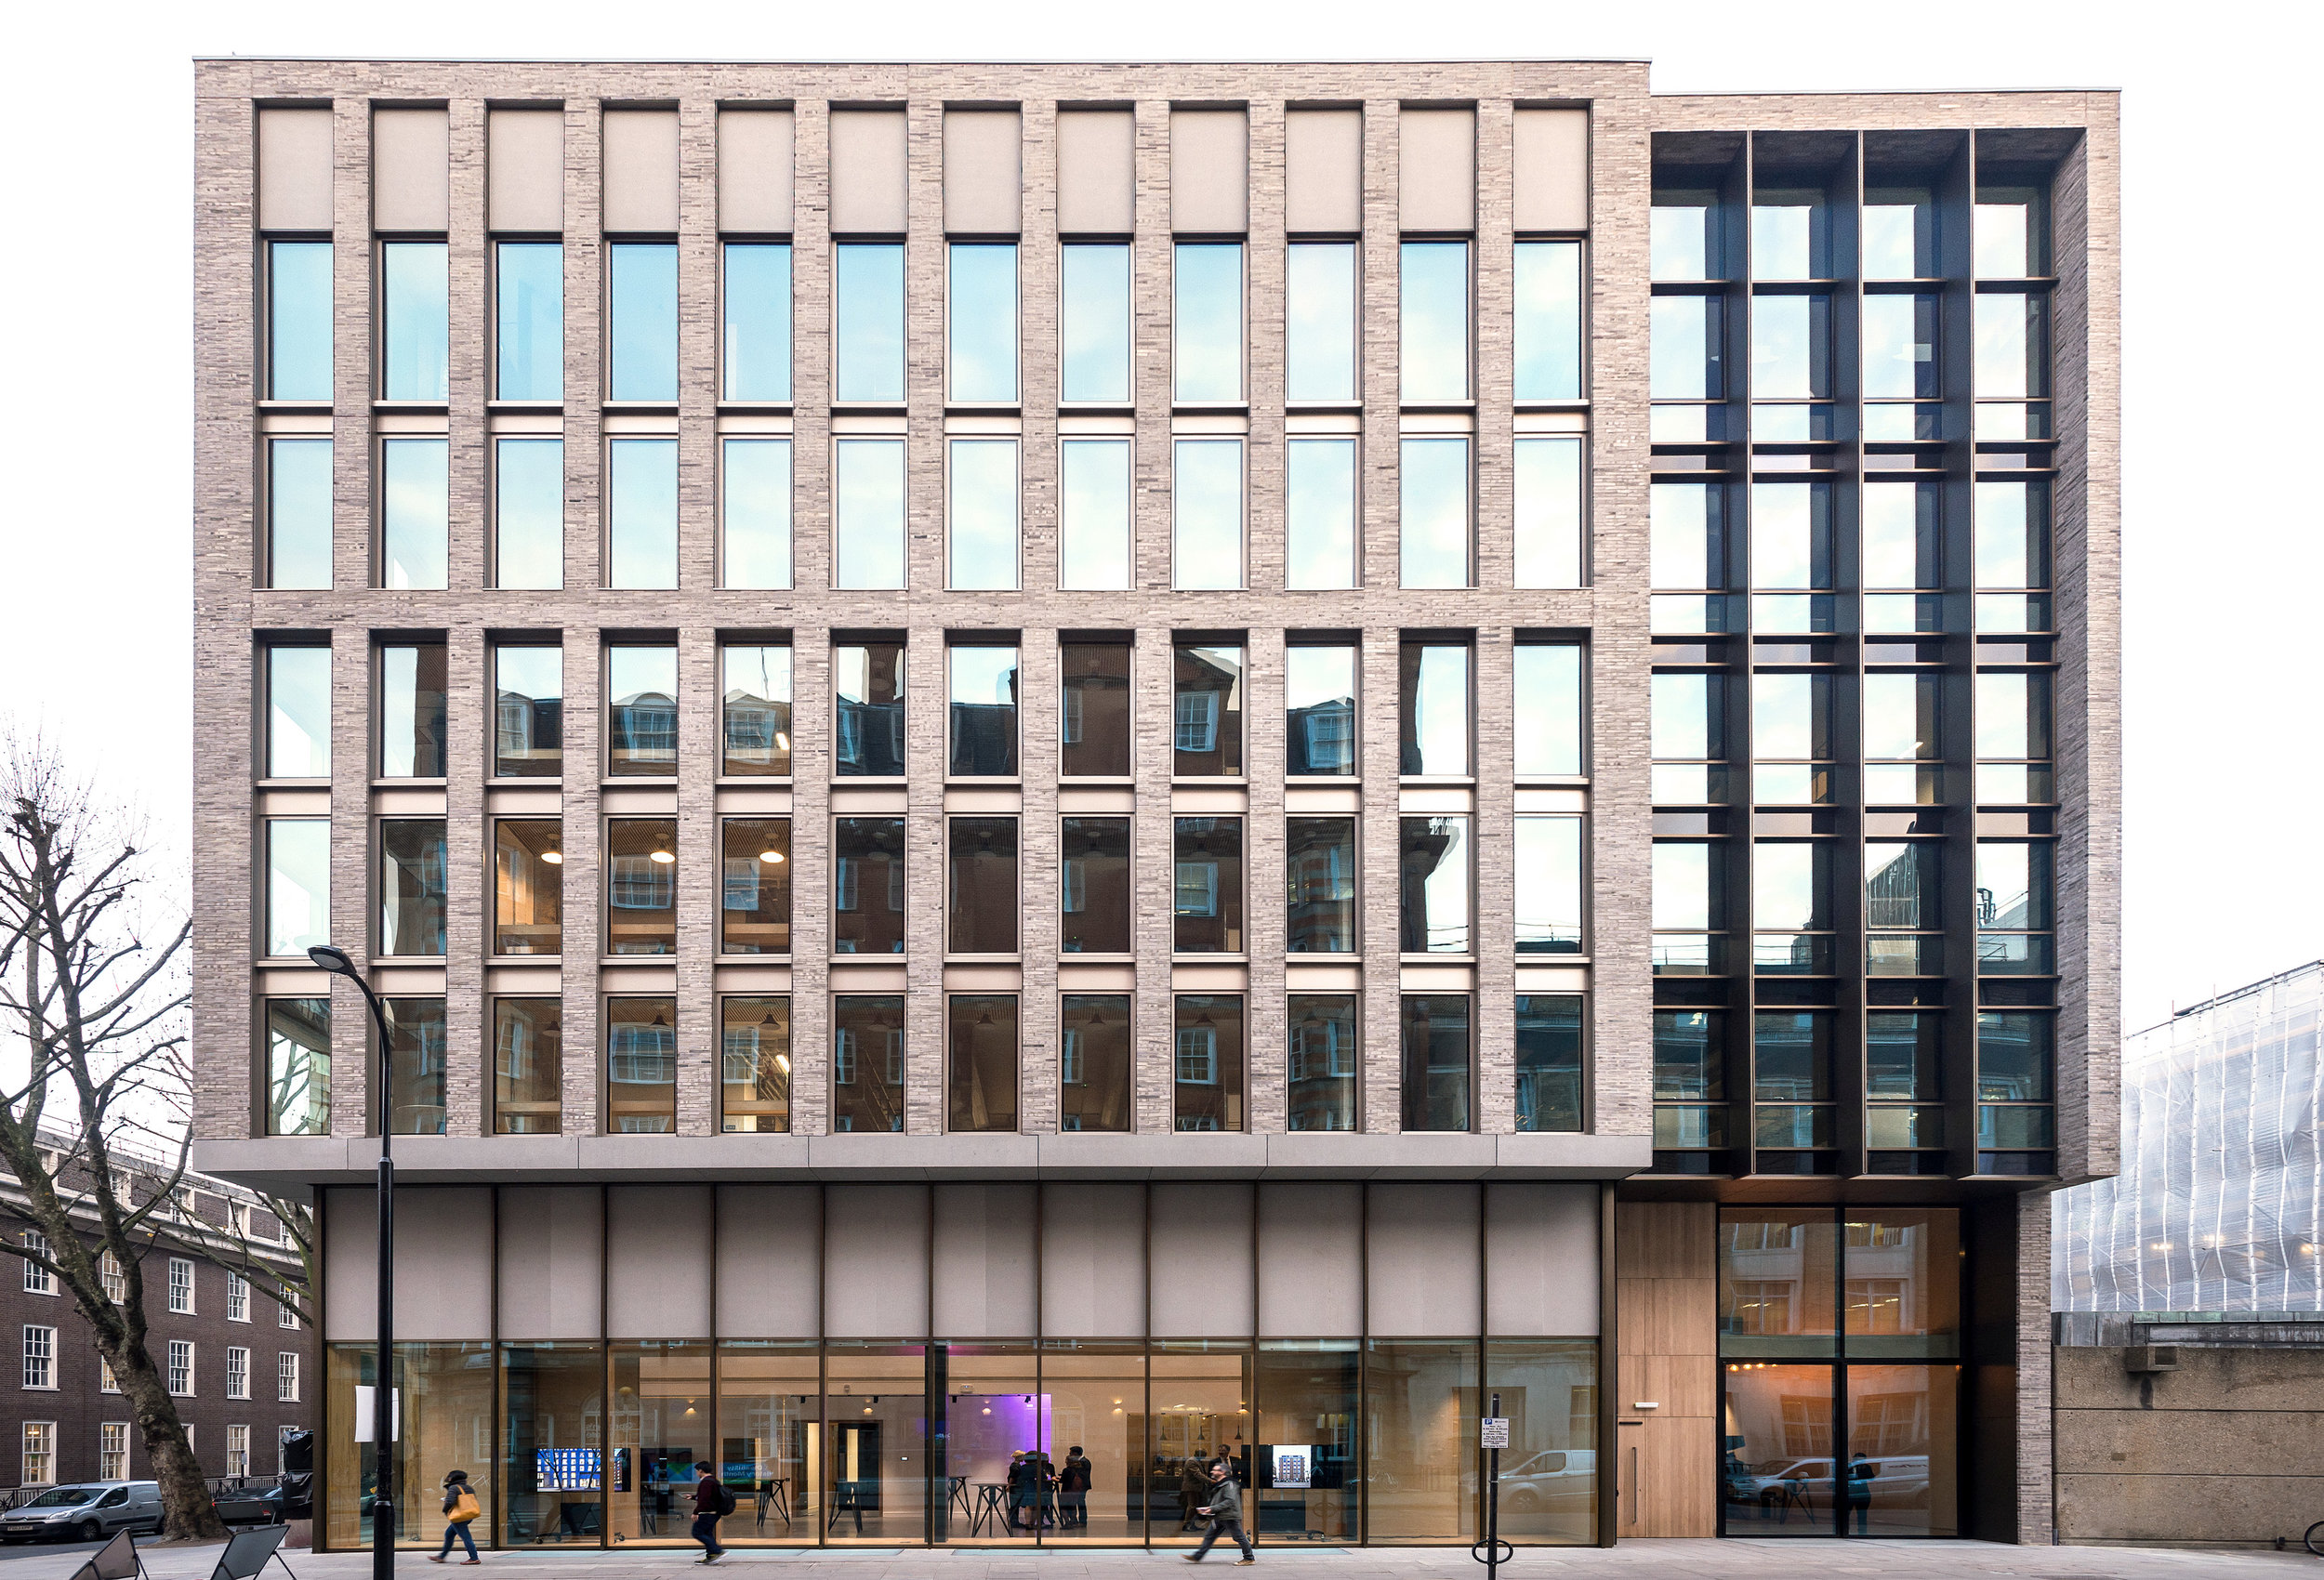  The exterior of the refurbished Bartlett School of Architecture, 22 Gordon Street. London by Hawkins/Brown Architects 